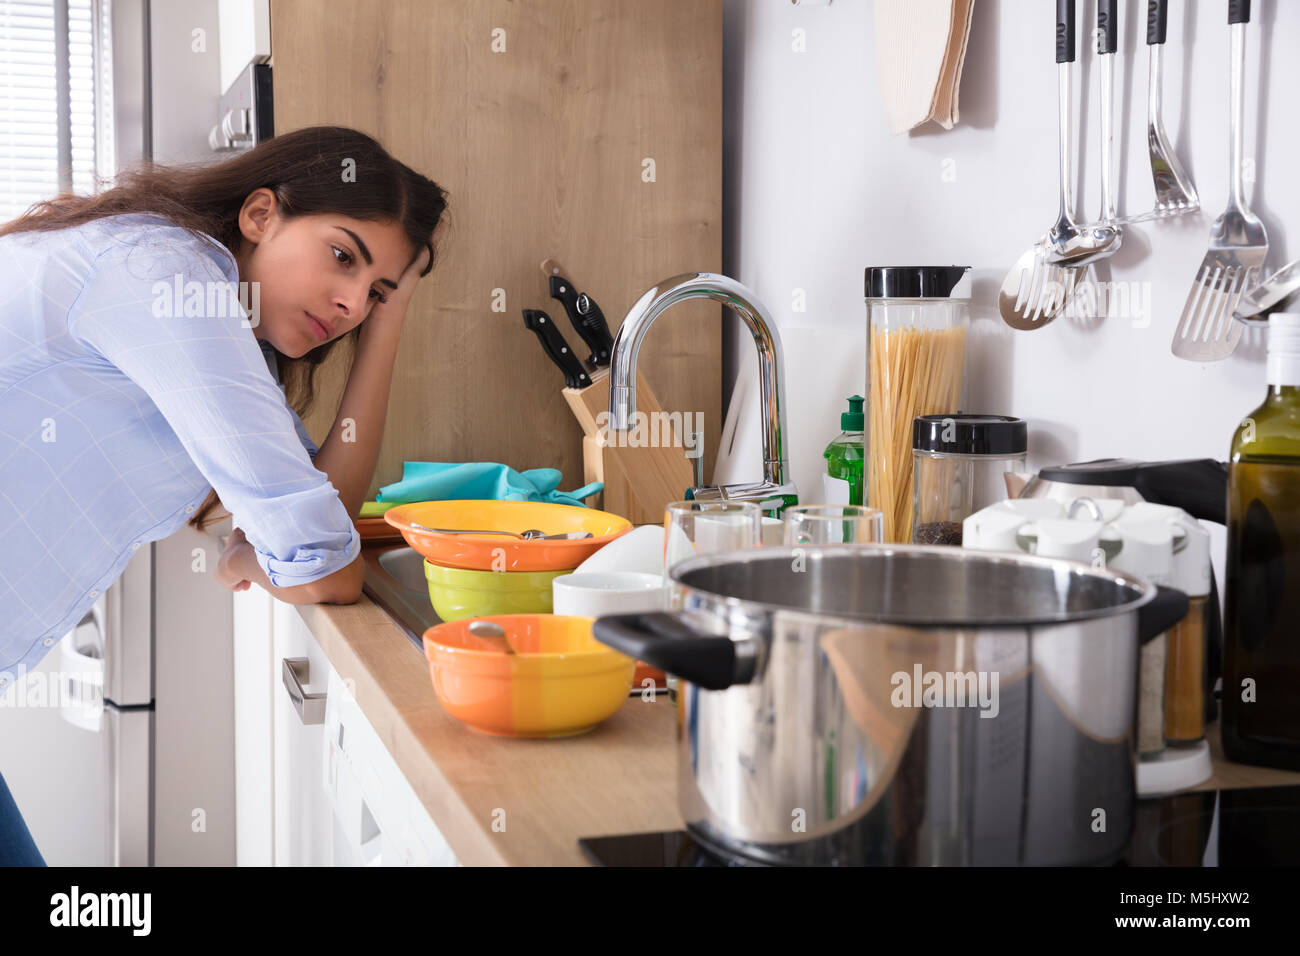 Tired Young Woman Standing Near Kitchen Sink Looking At Utensils In Kitchen Stock Photo